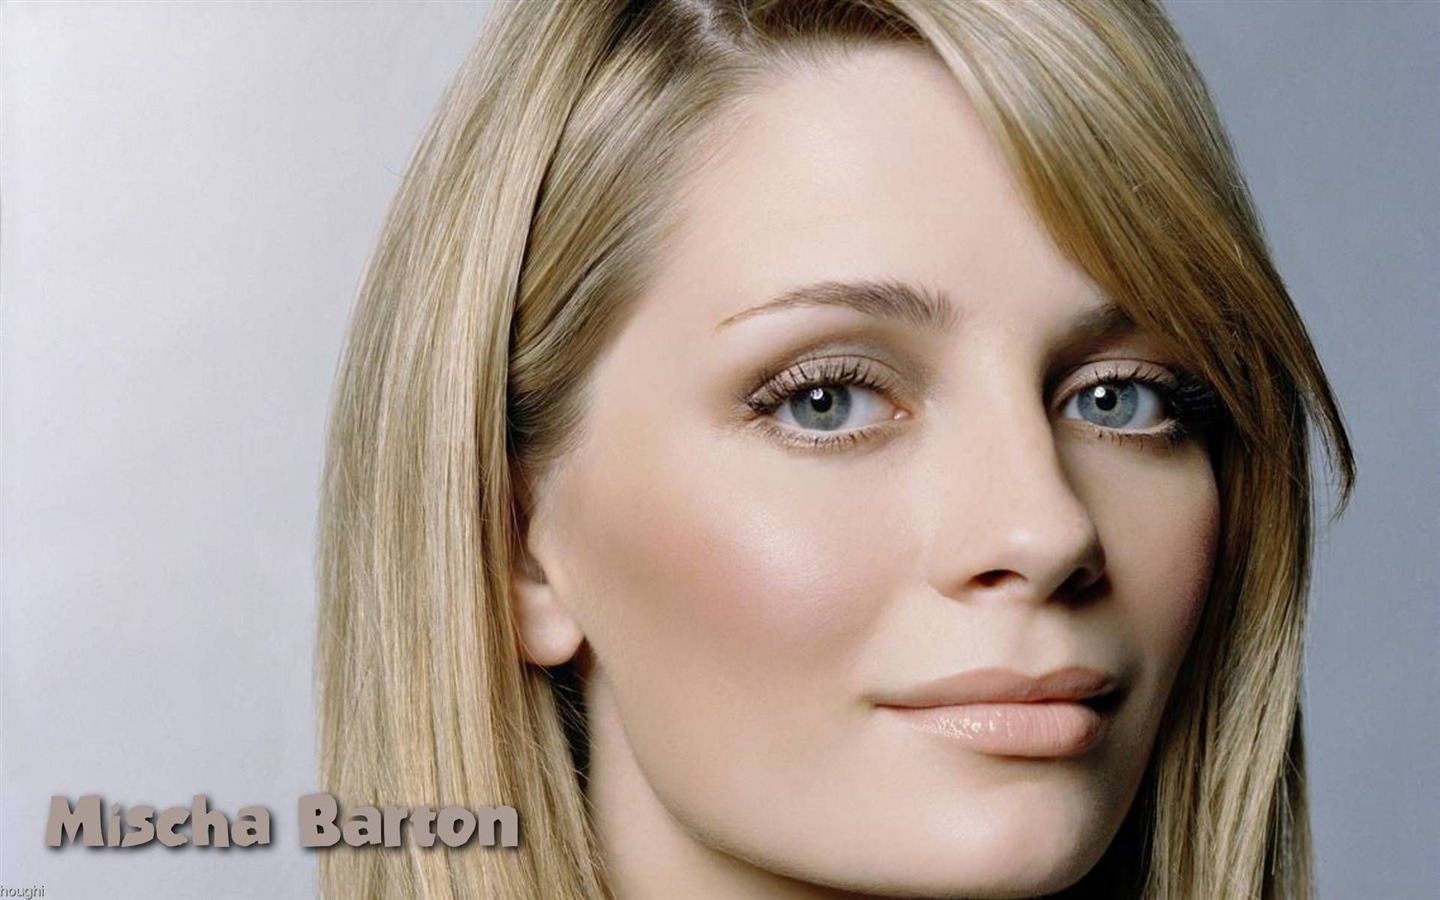 Mischa Barton #073 - 1440x900 Wallpapers Pictures Photos Images